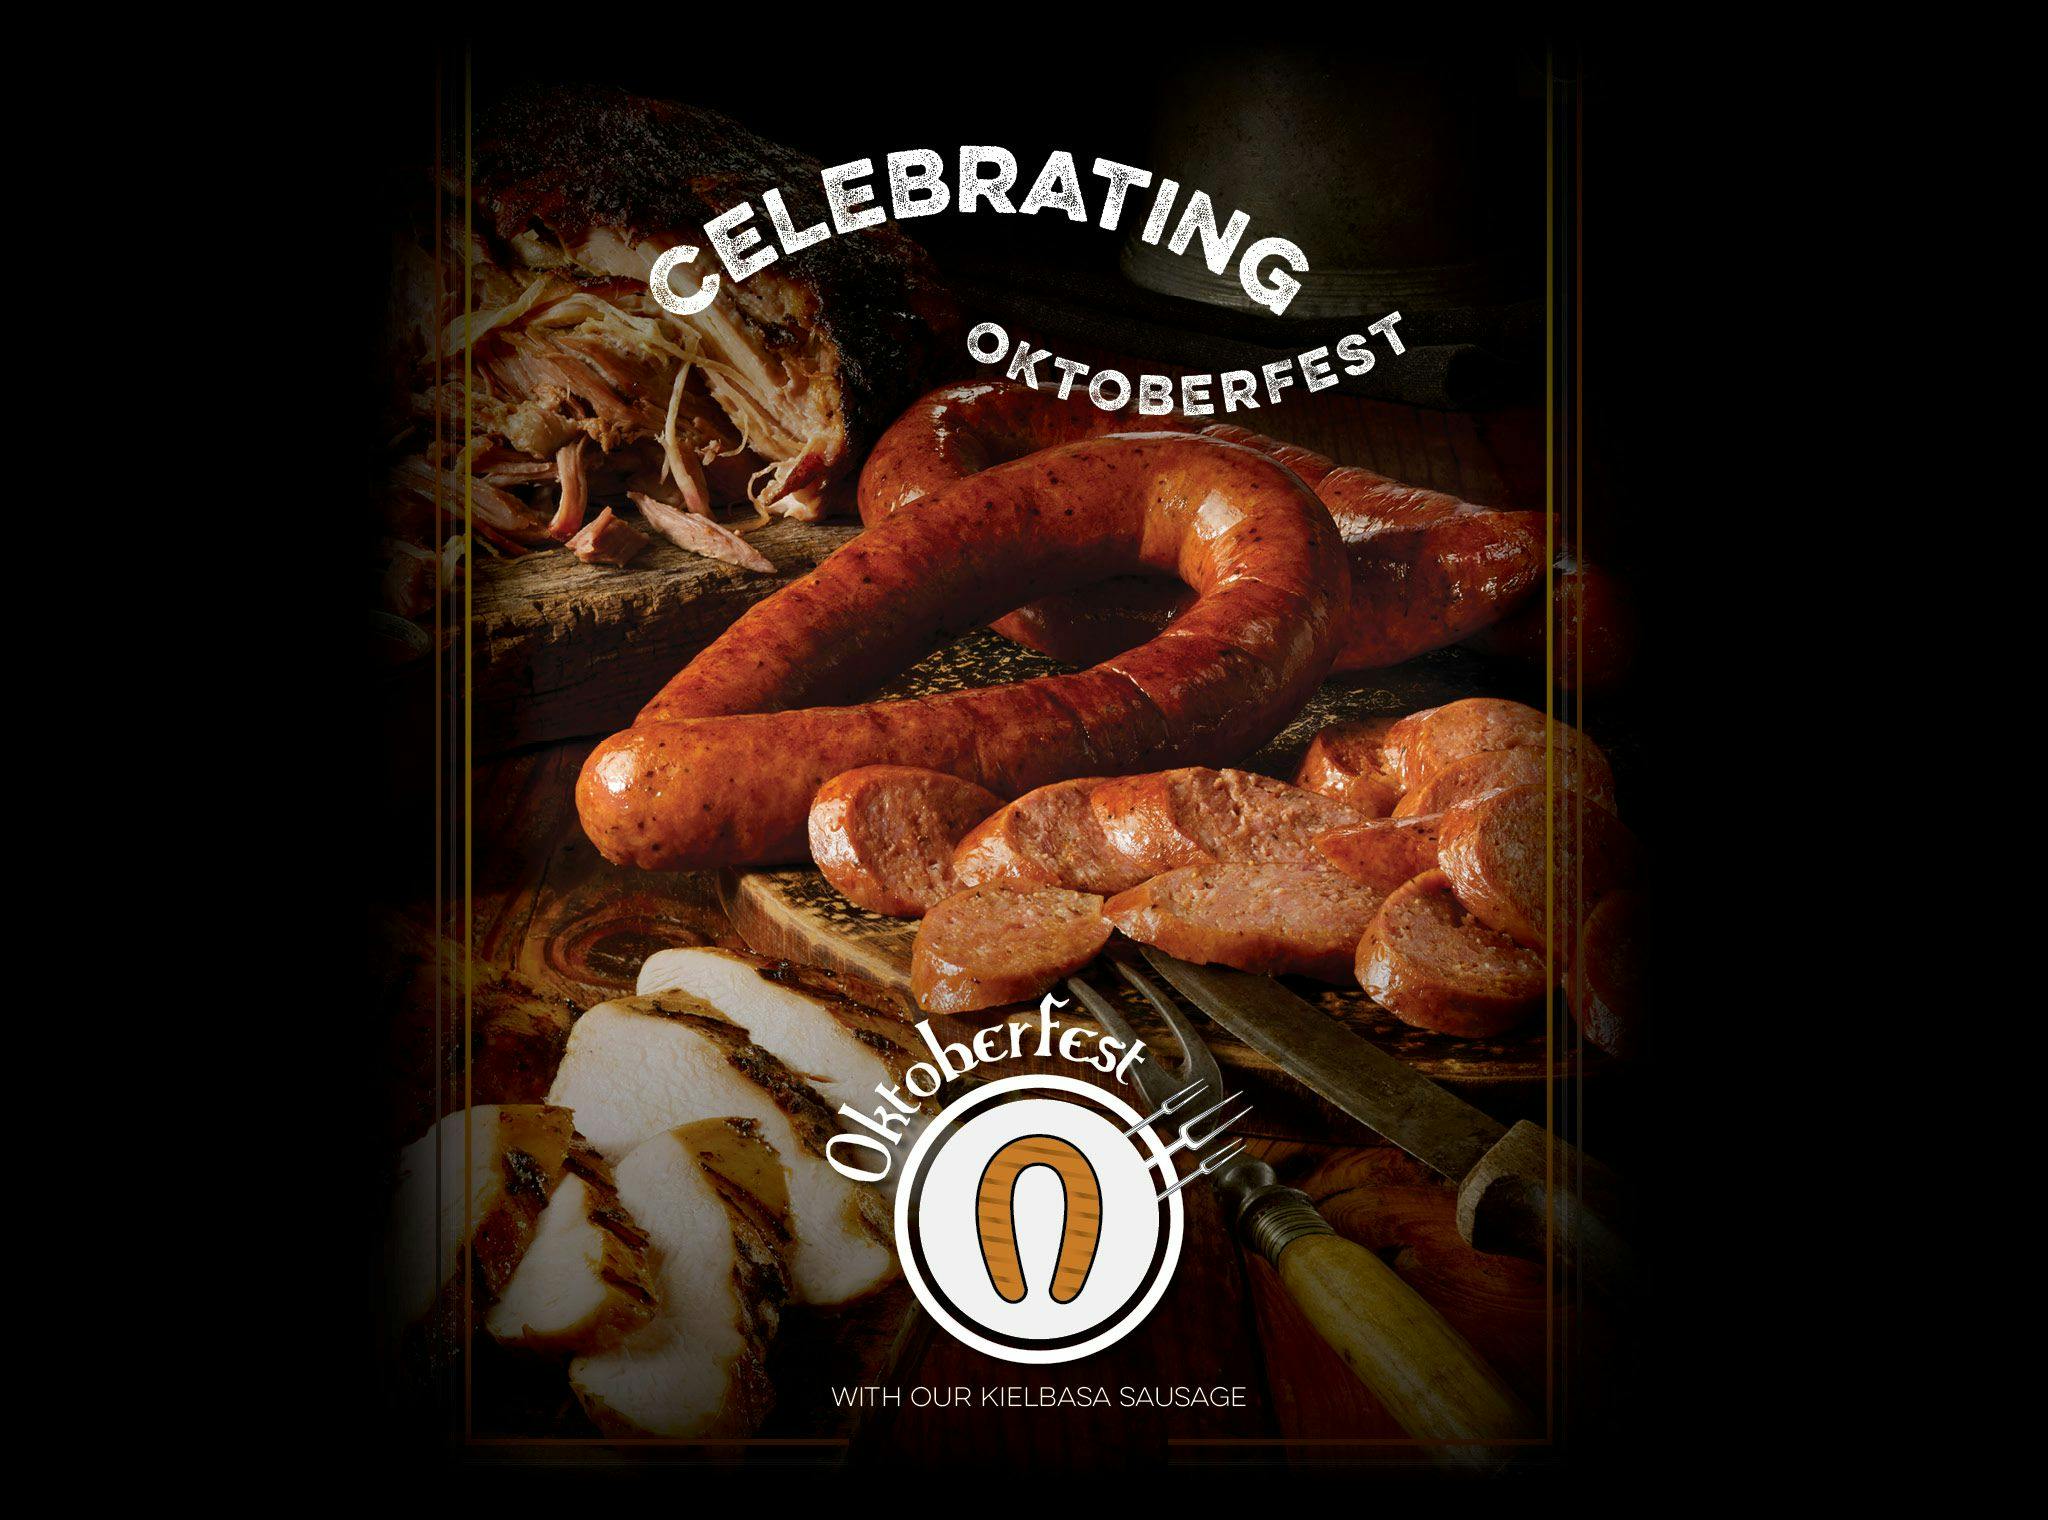 Find Everything You Need to Host Your Own Oktoberfest Online Barbecue At Home Makes It as Easy as 1-2-3.  